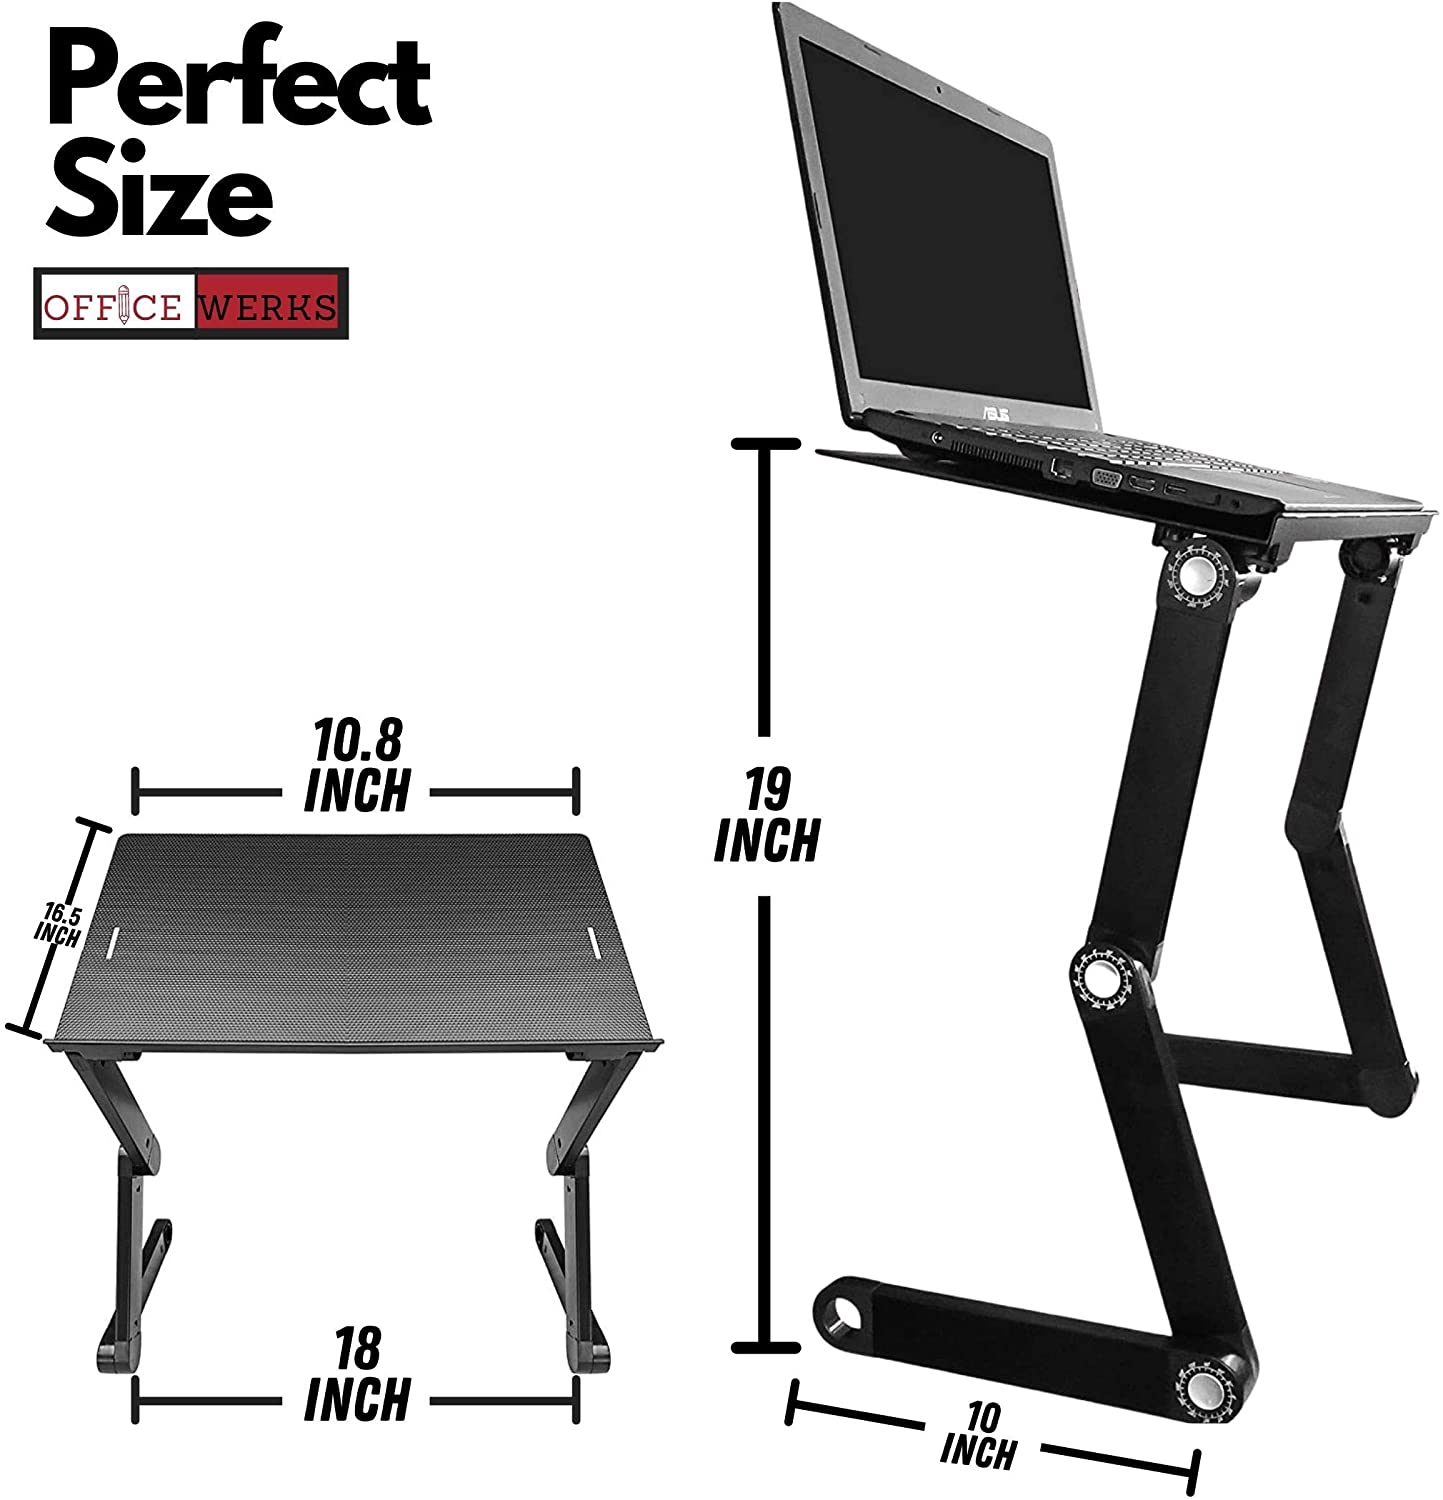 Officewerks Adjustable and Portable Computer Laptop Stand/Desk with Mouse Pad, Ergonomic Design